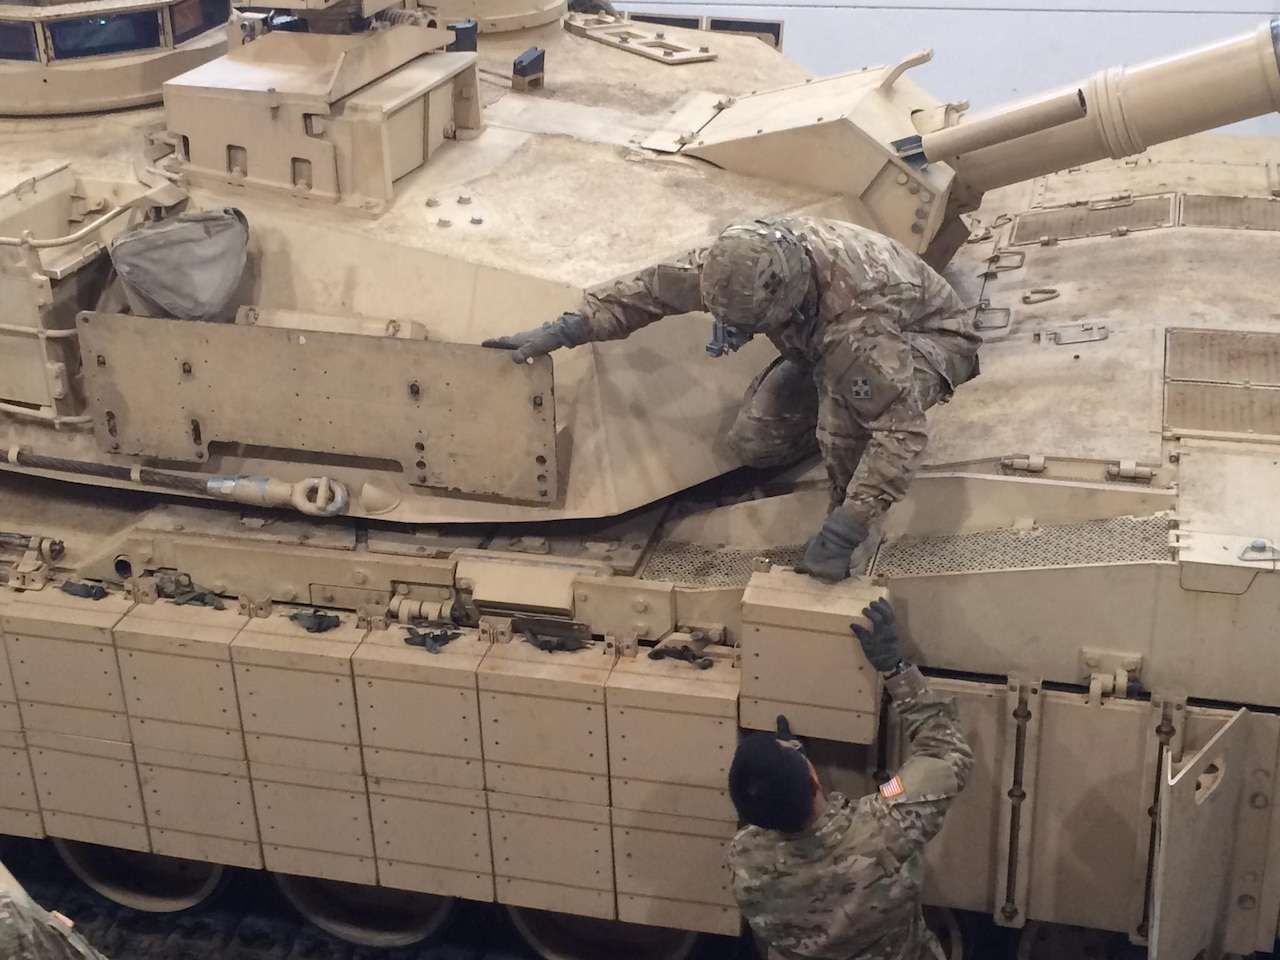 Tank and maintenance crews with 1st Battalion, 66th Armor Regiment, install reactive armor tiles onto a M1A2 Abrams tank at the 7th Army Training Command's Grafenwoehr Training Area, Germany, Feb. 28, 2017. The installation of the Abrams Reactive Armor Tile system will enhance the tank's defensive capabilities, providing a greater deterrent against aggression as the 3rd ABCT maintains a persistent presence in Central and Eastern Europe as the rotational ABCT for Atlantic Resolve. Army photo by Capt. (Chaplain) Malcolm Rios